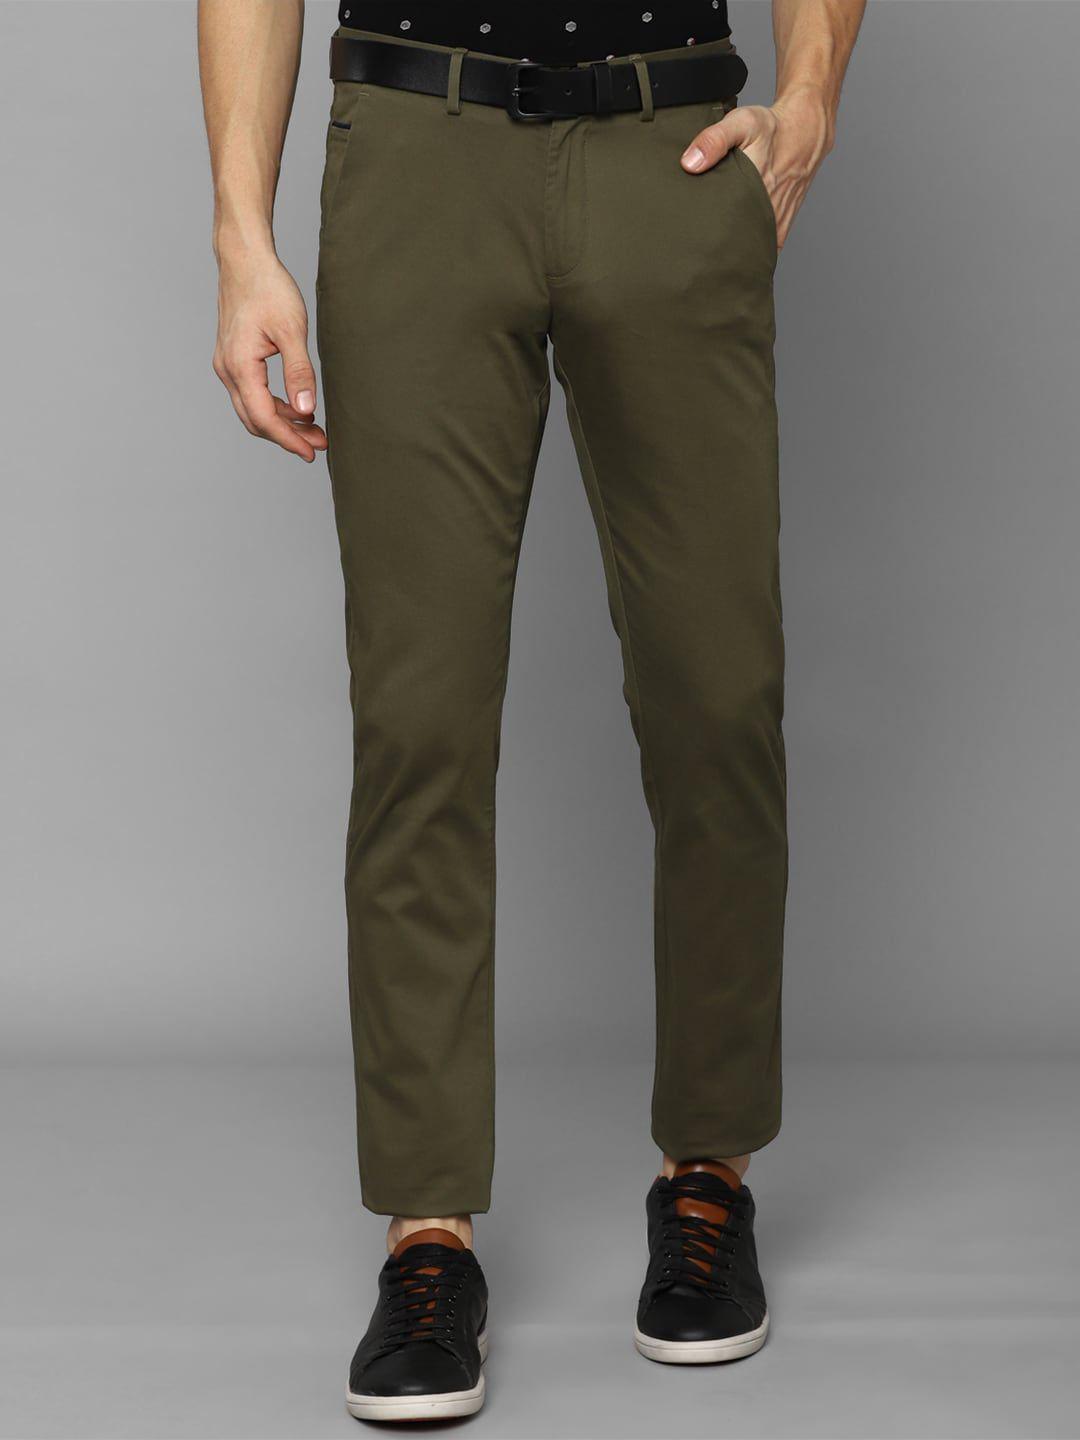 allen solly men olive green slim fit solid trousers